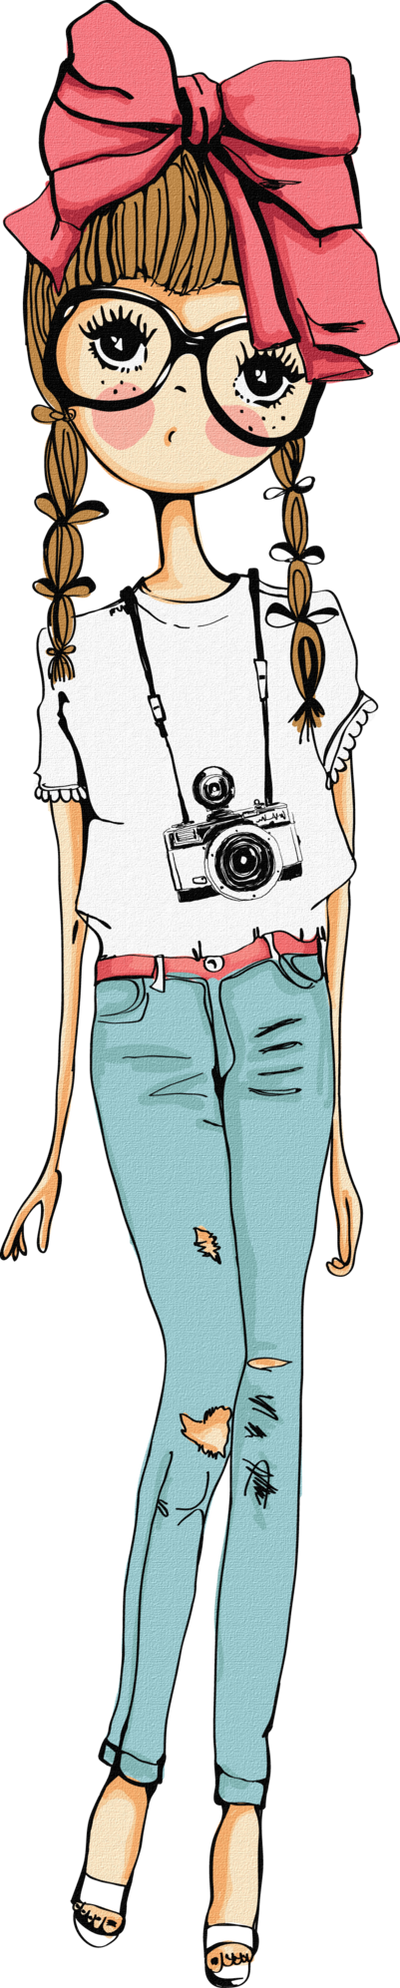 clipart vintage girl png - photo #34